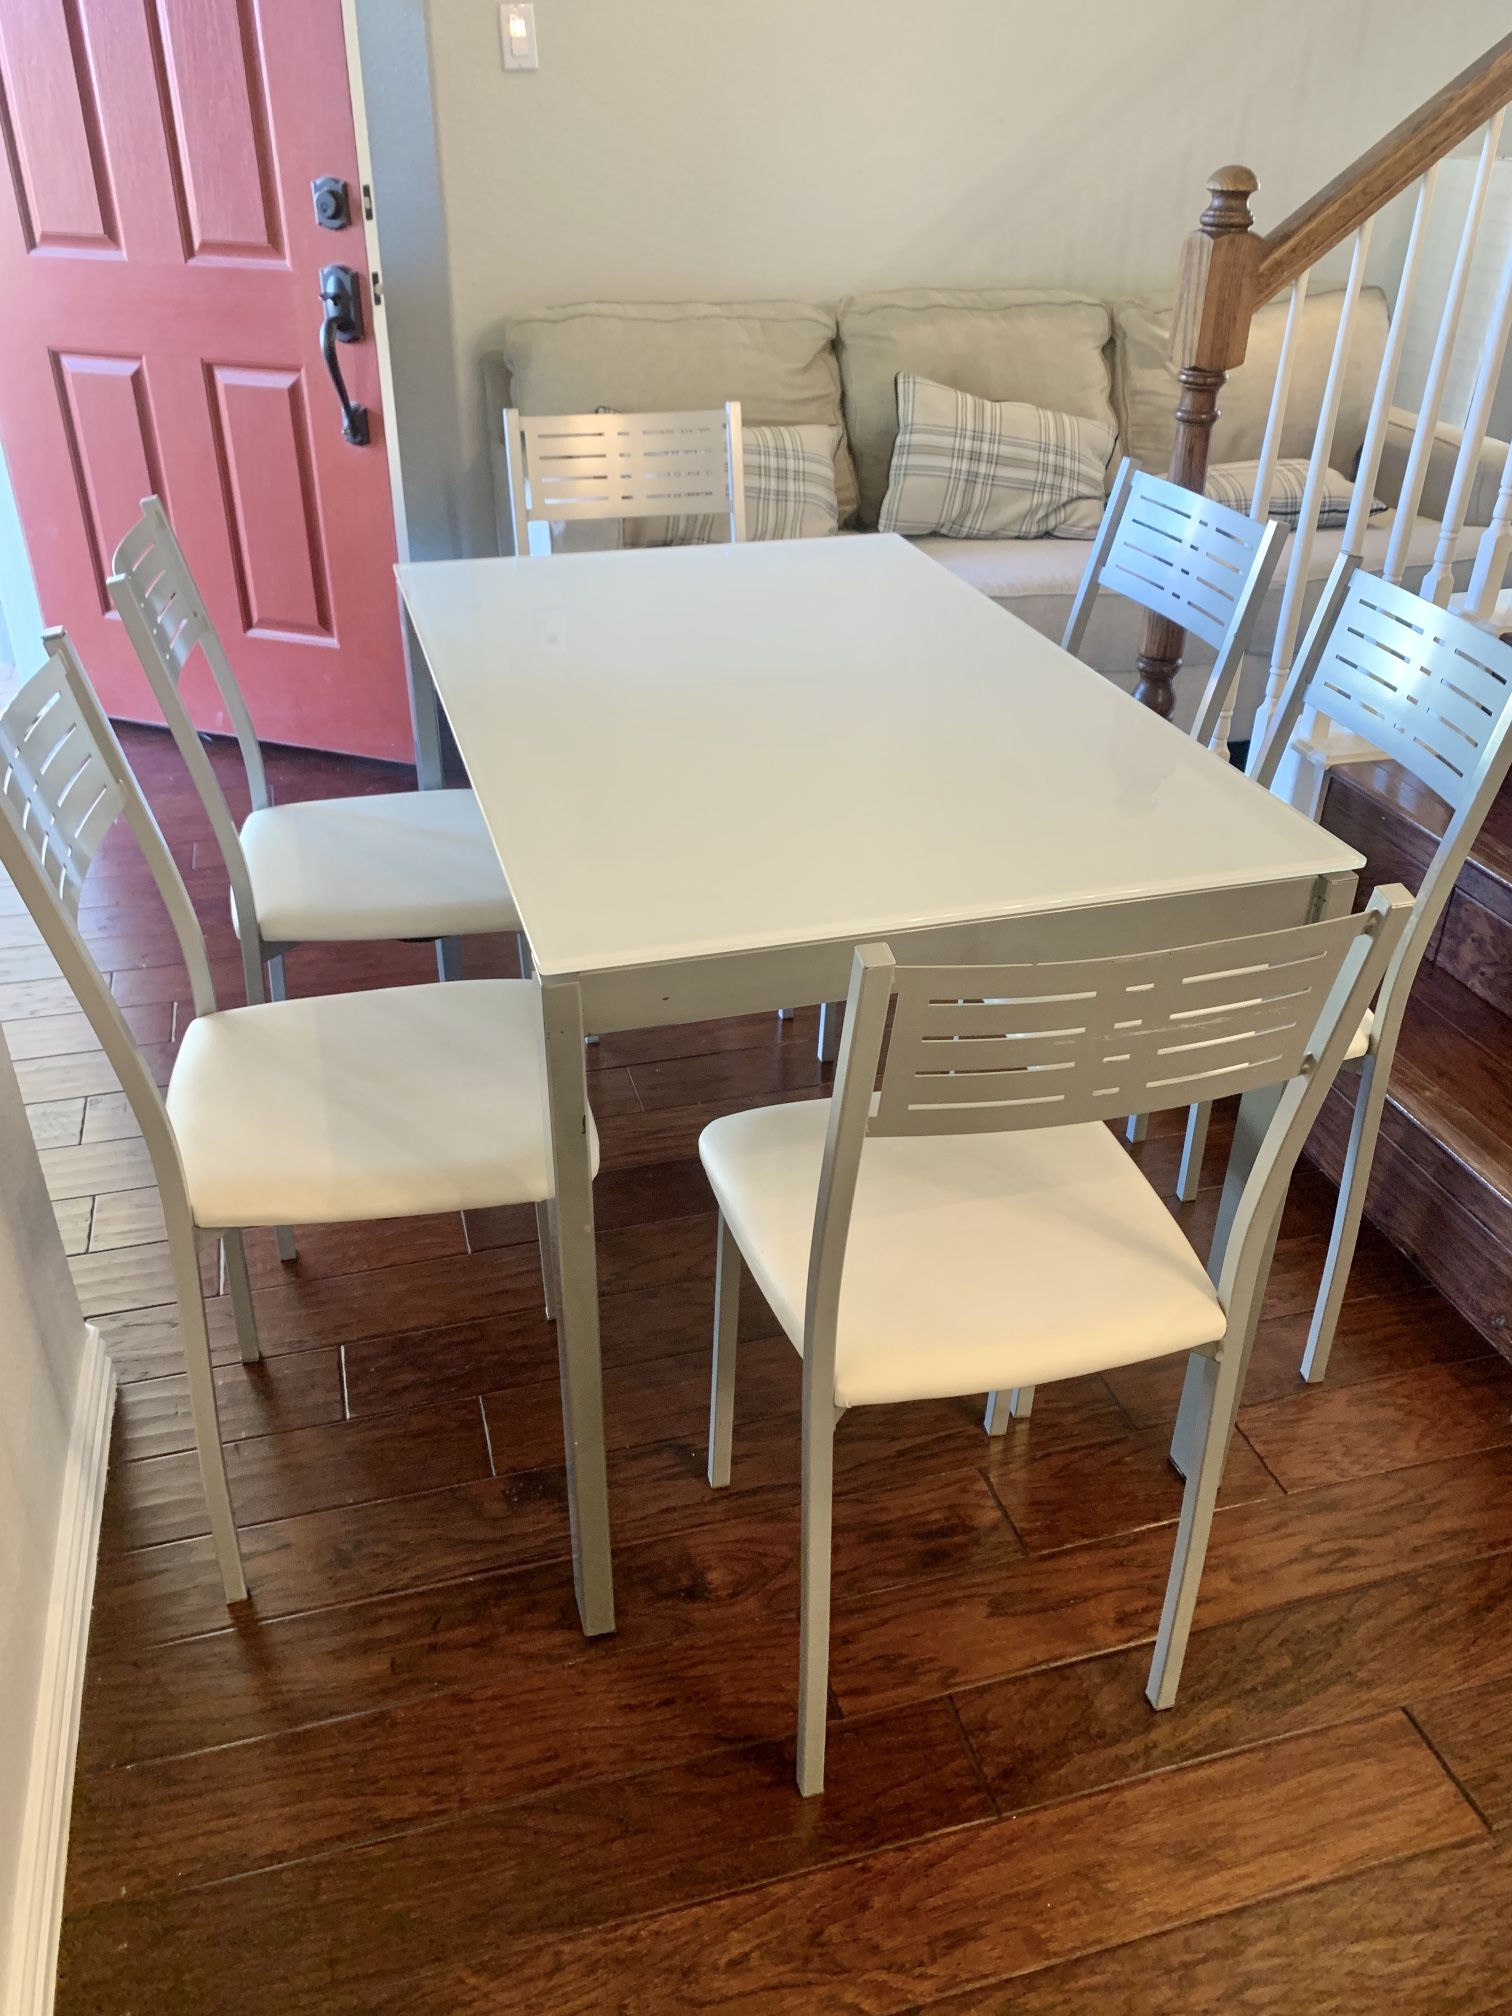 NEEDS TO GO! SET TABLE + 6 CHAIRS